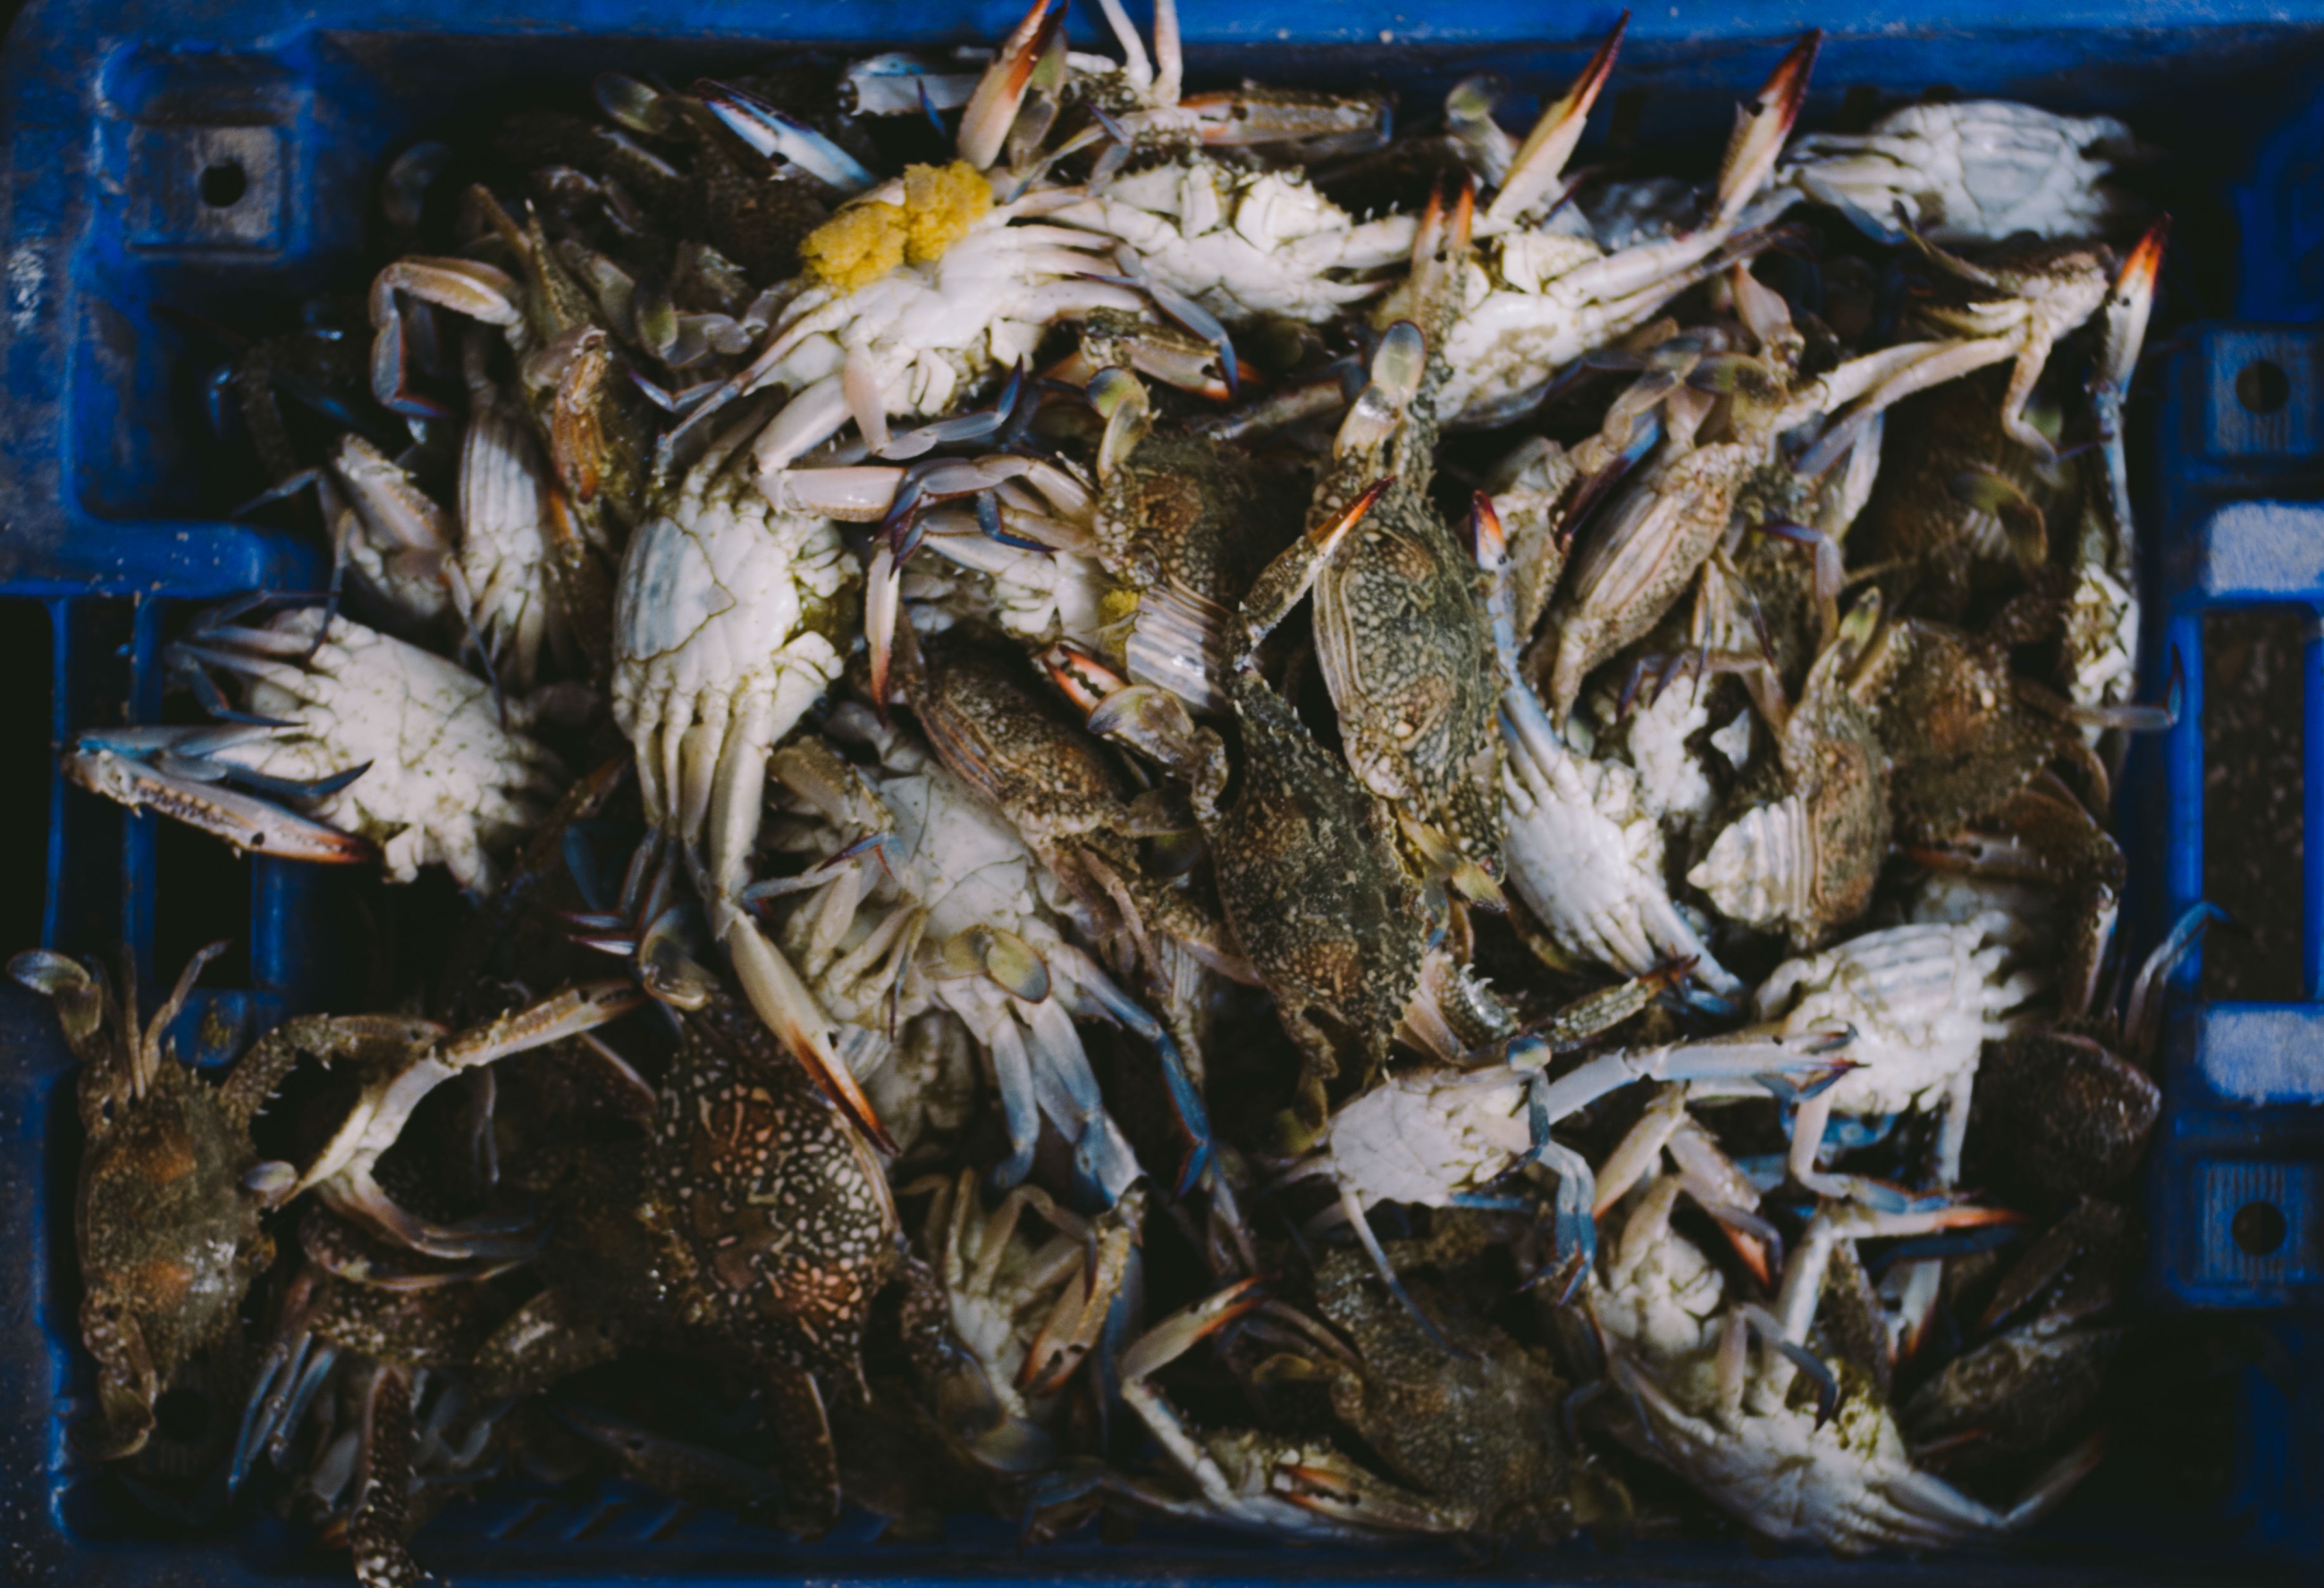 Gaza's fish market lies empty, too big for the downsized hauls with which fishermen now return. But among the jumble of fish and the odd baby shark there is always a crate of prized blue crab 